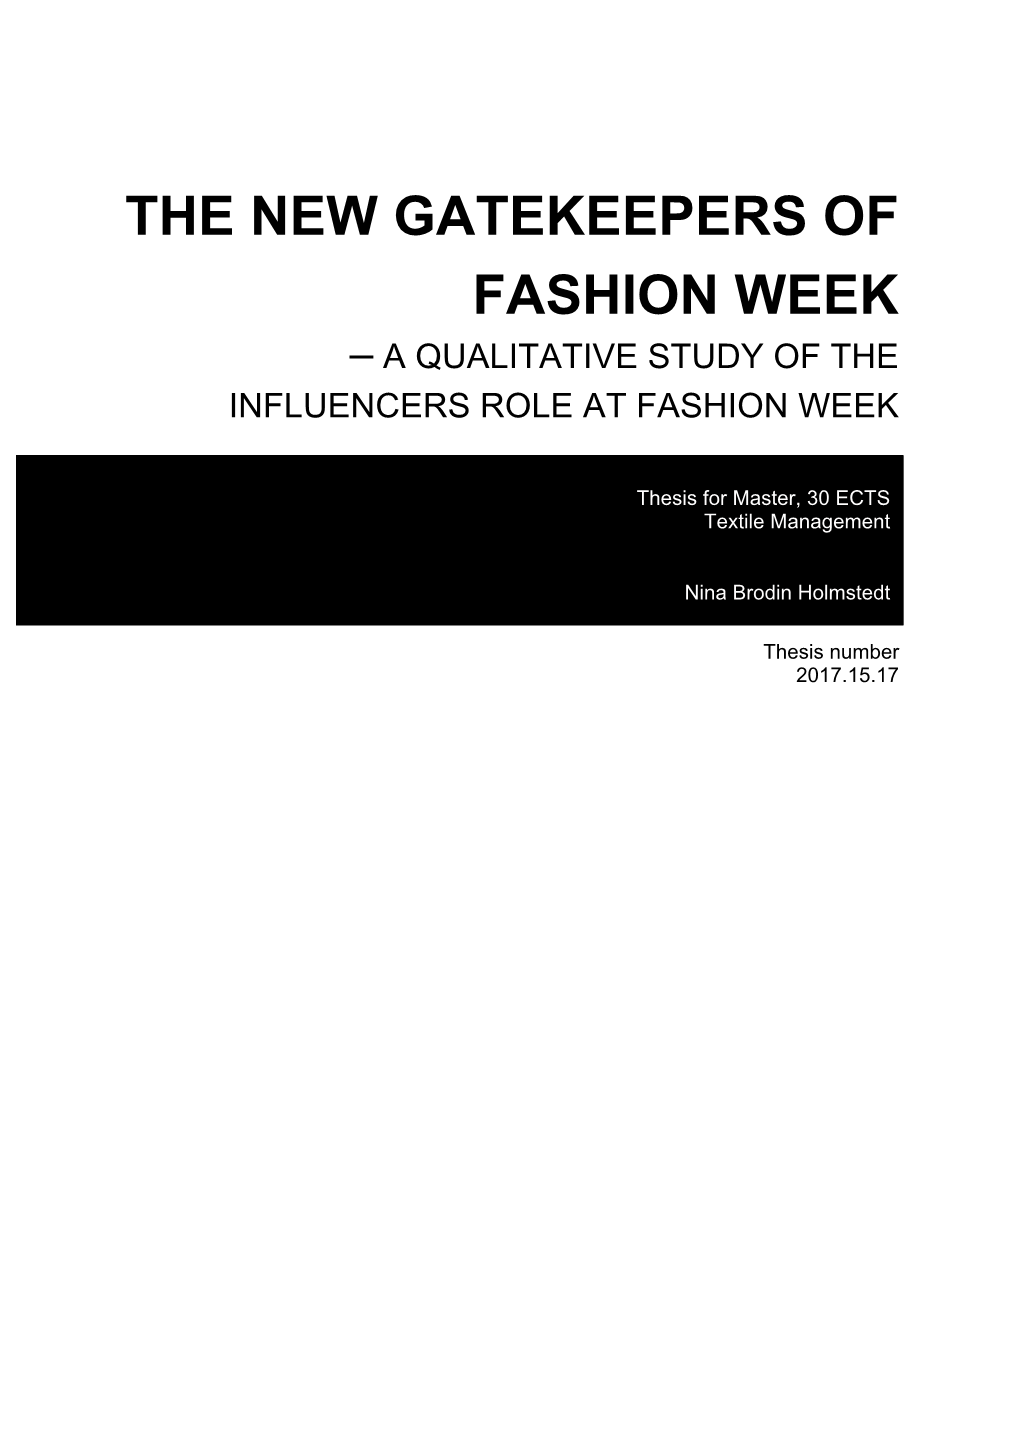 The New Gatekeepers of Fashion Week – a Qualitative Study of the Influencers Role at Fashion Week